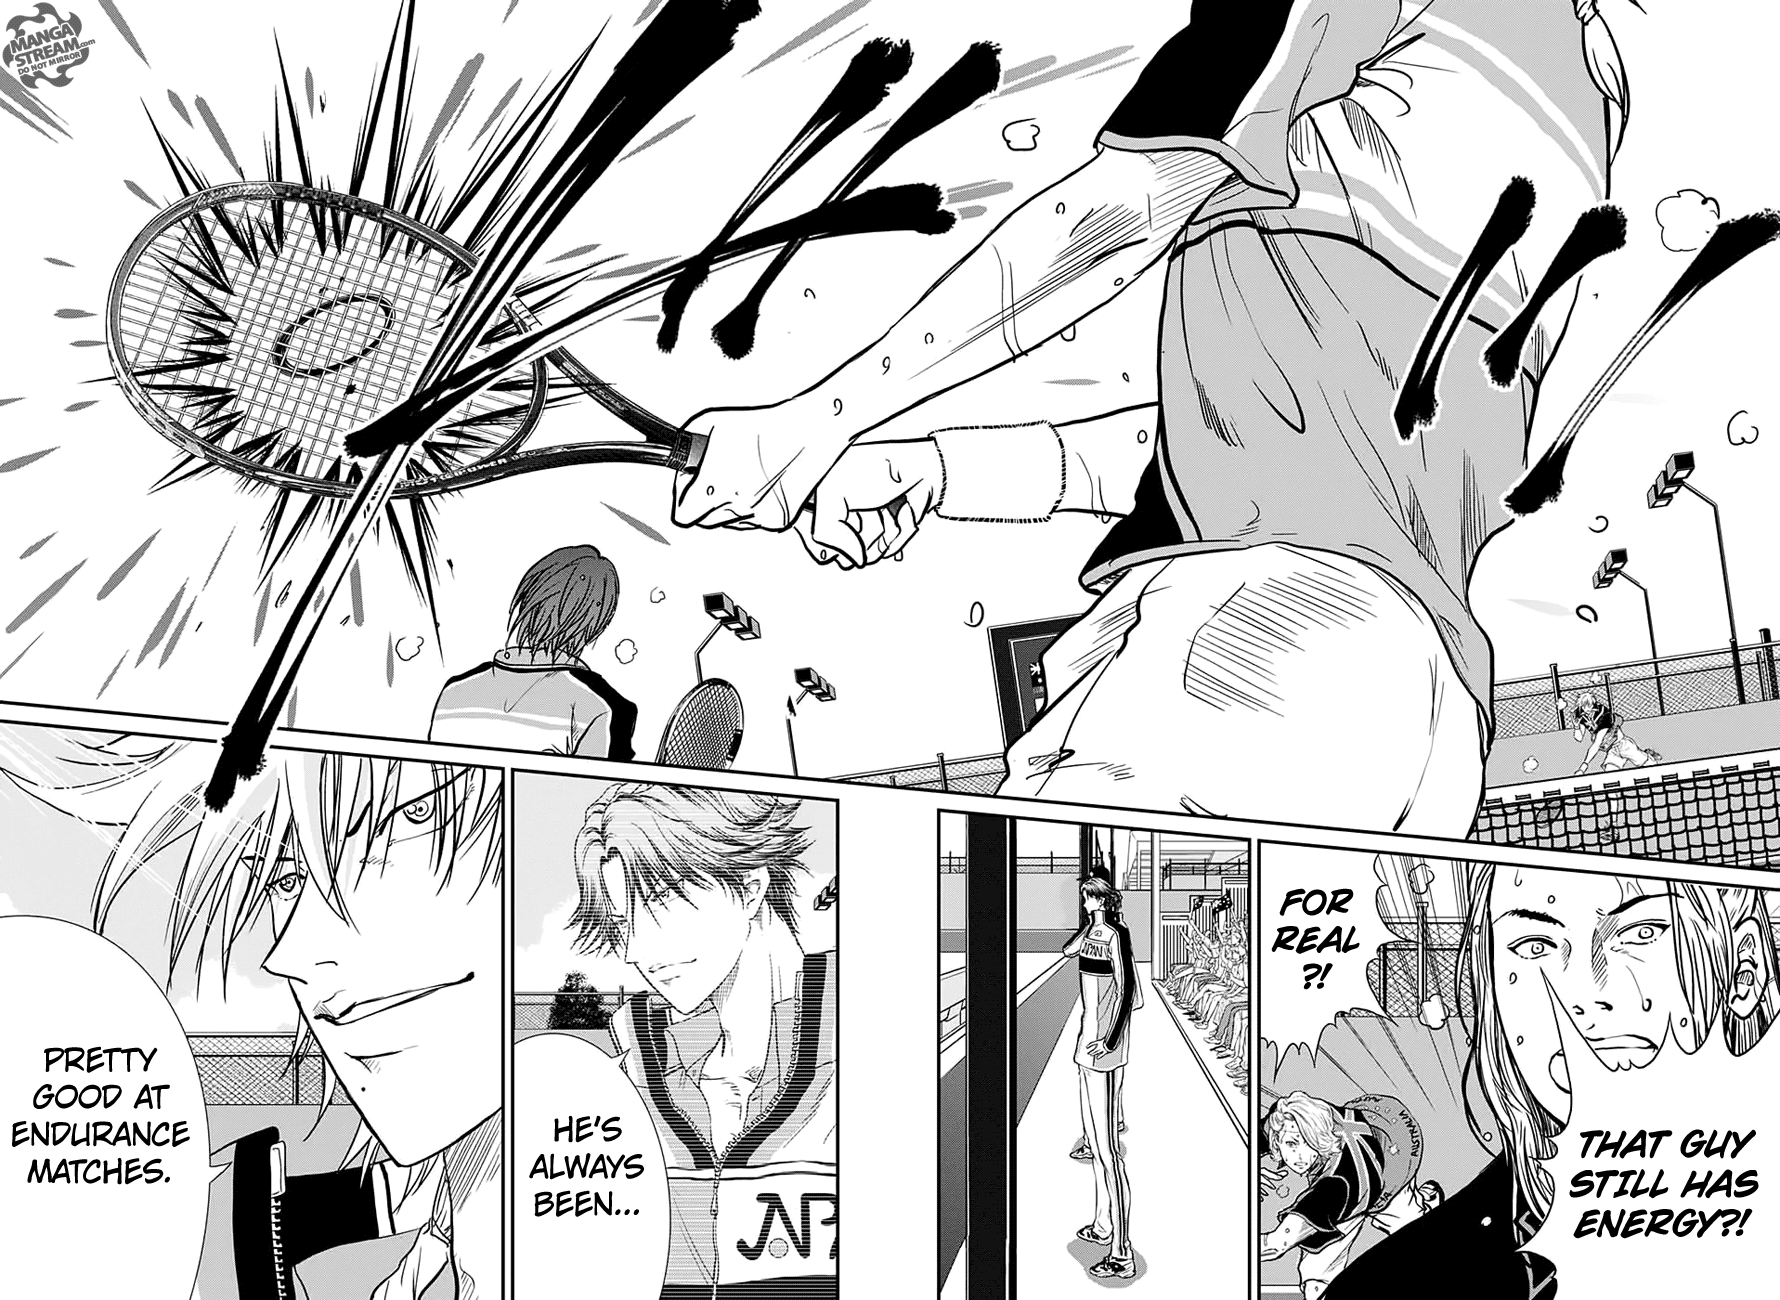 New Prince of Tennis Chapter 205